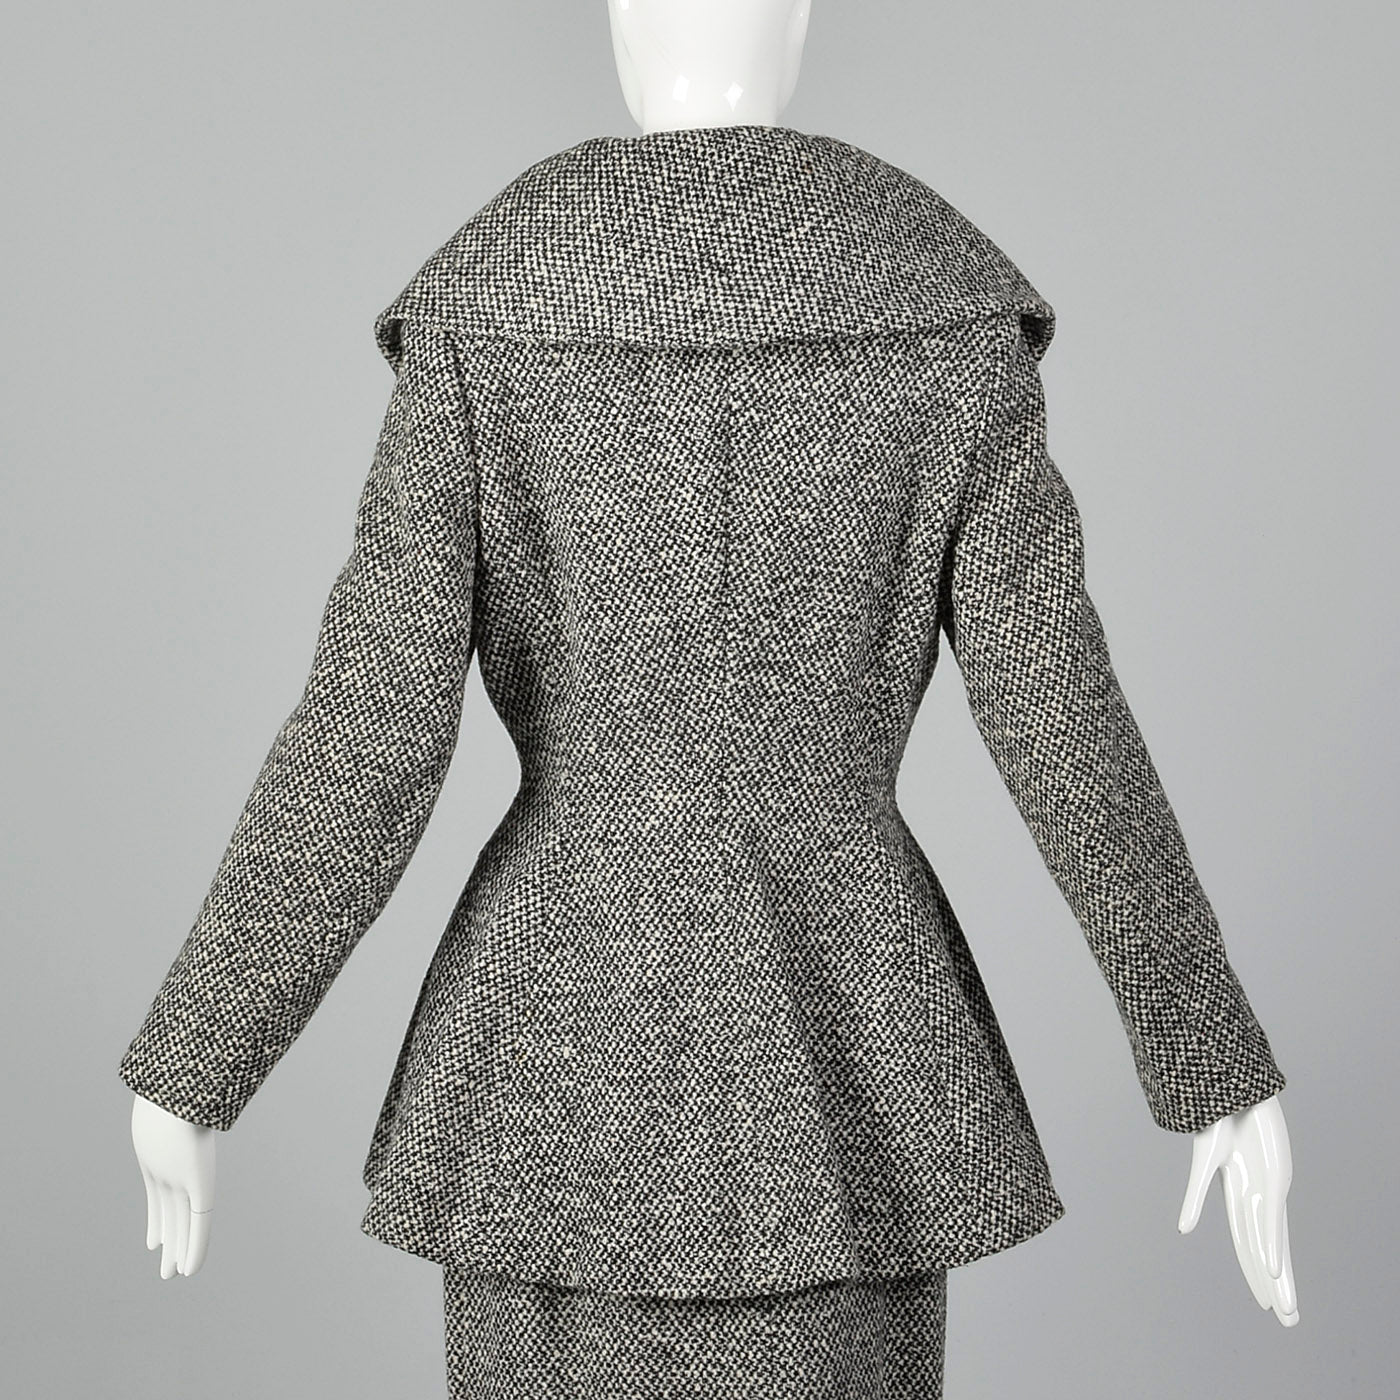 1950s Wool Tweed Skirt Suit with Sculptable Portrait Collar